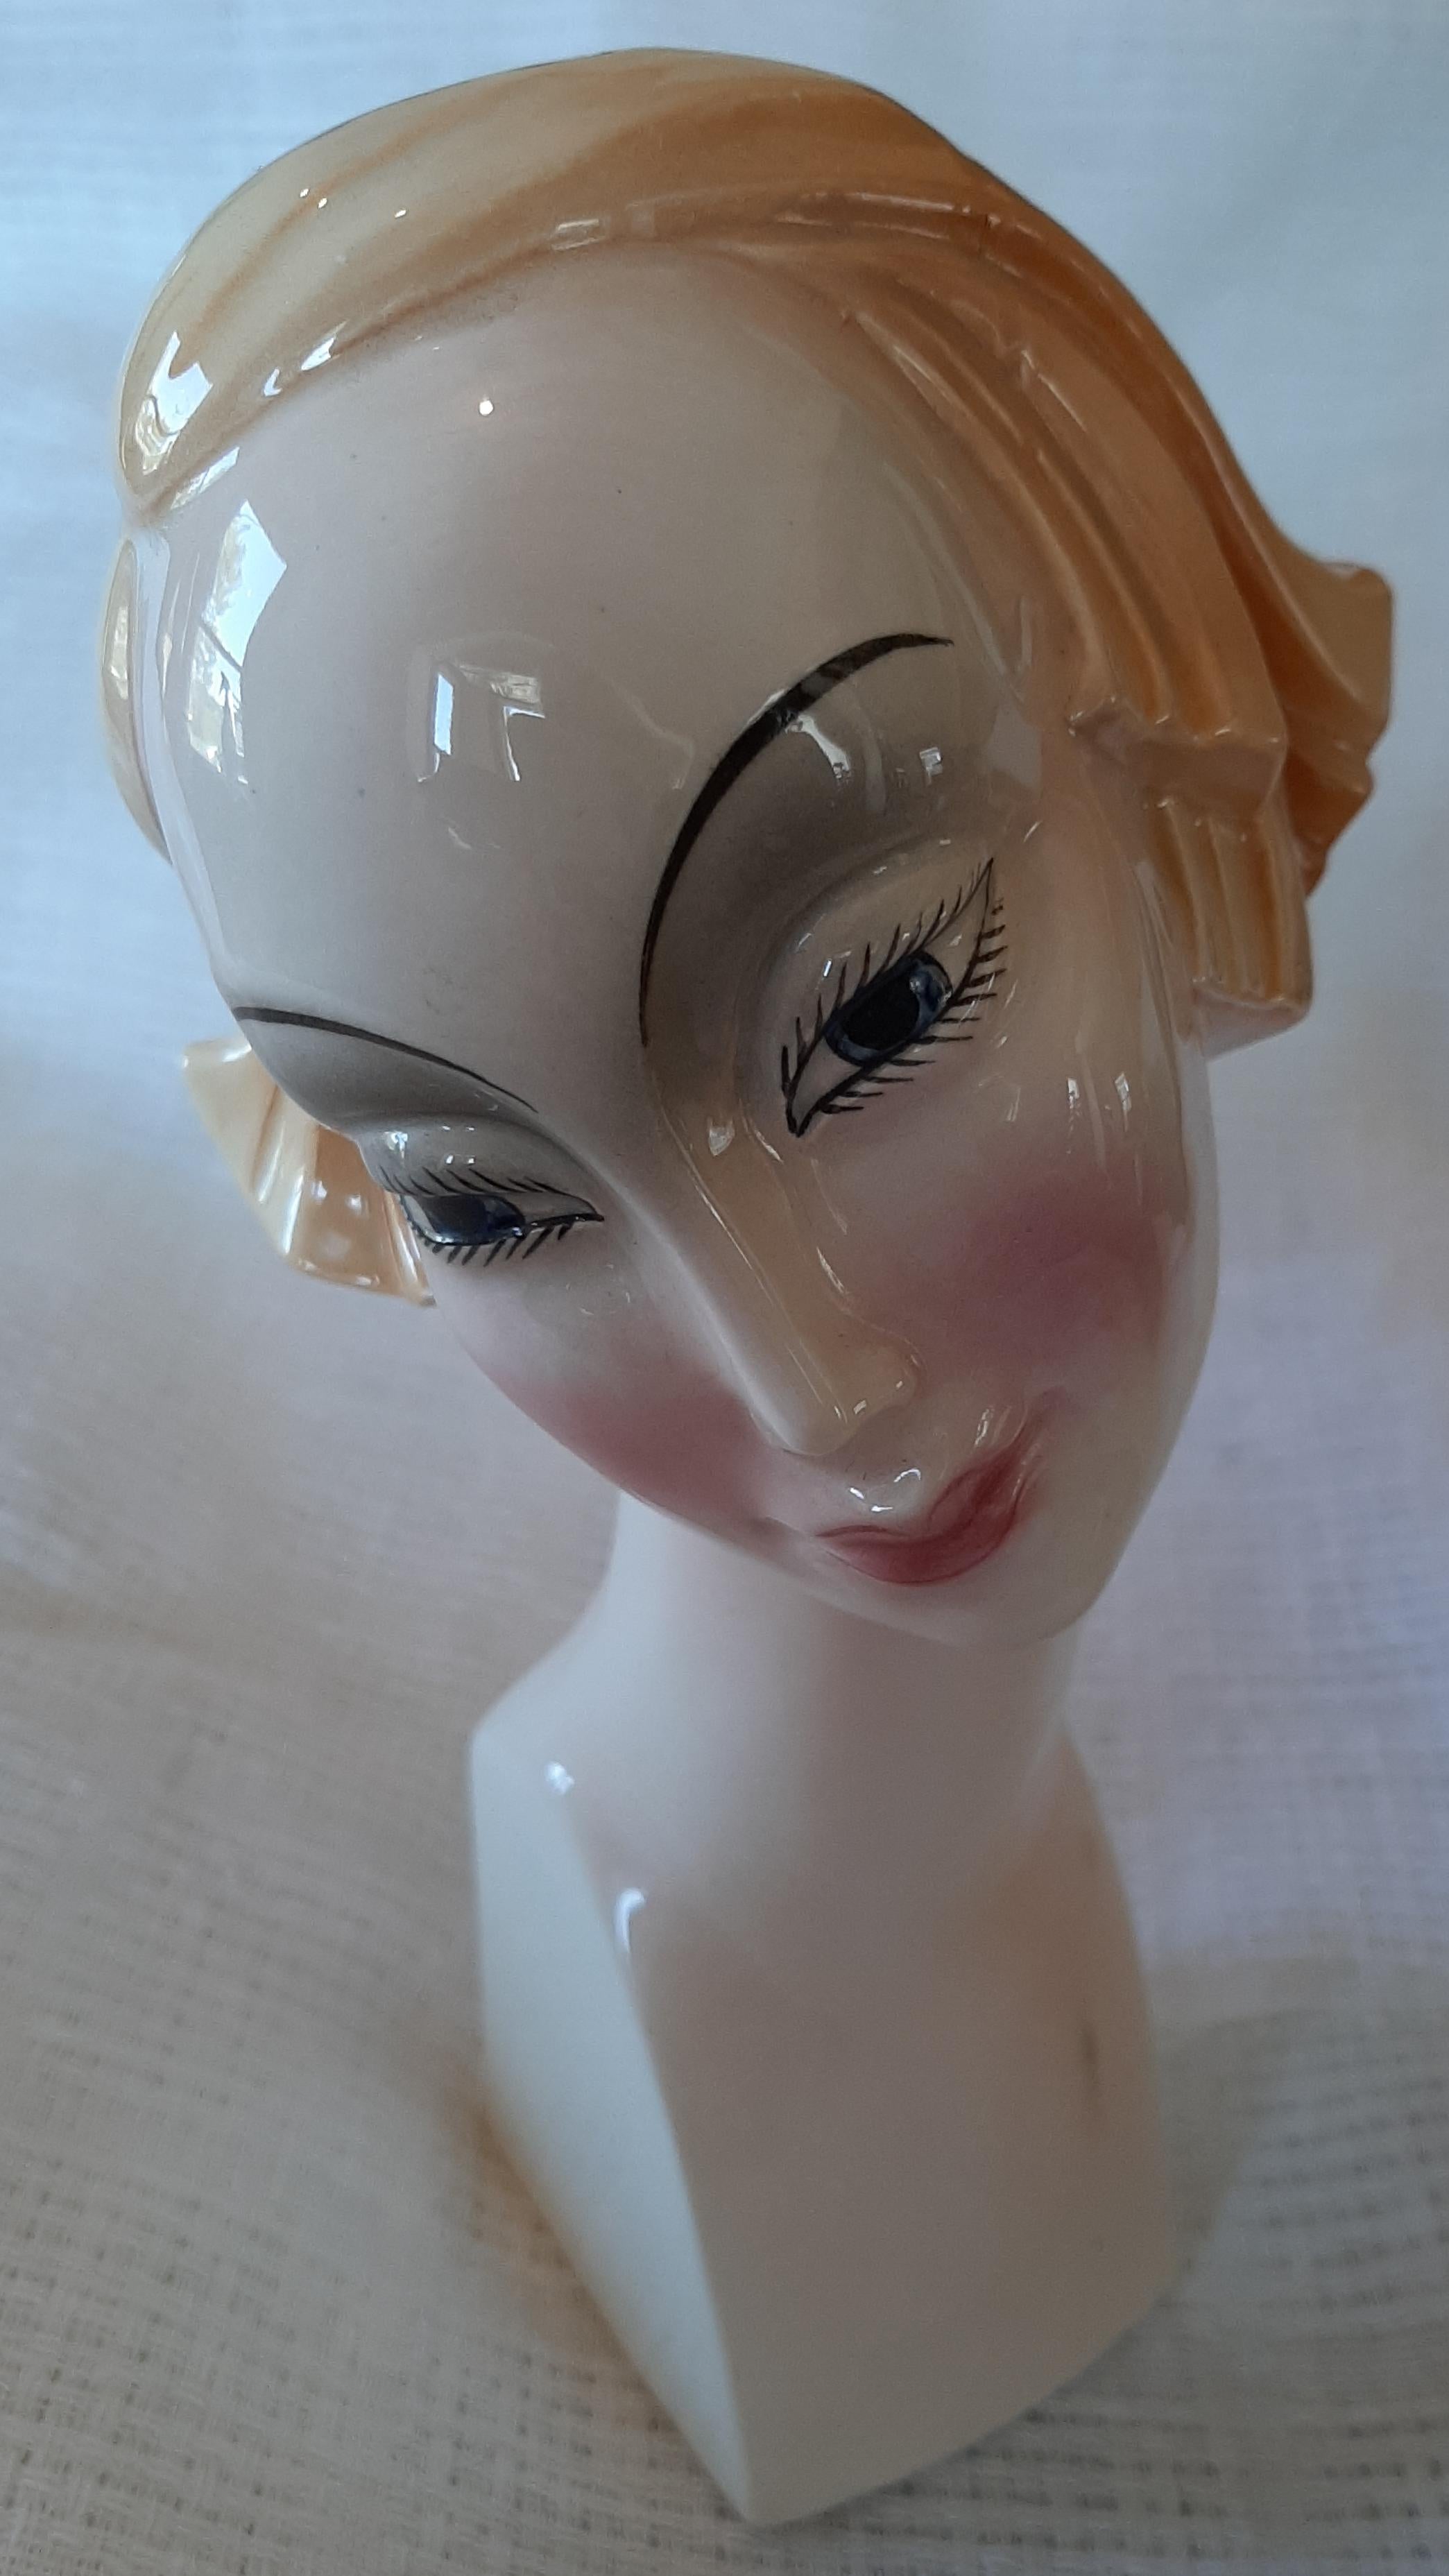 Circa. 1920s  Katzhutte Hertwig & Co. Art Deco porcelain flapper girl bust / head is a rare and unusual and collectible piece! Stands 8